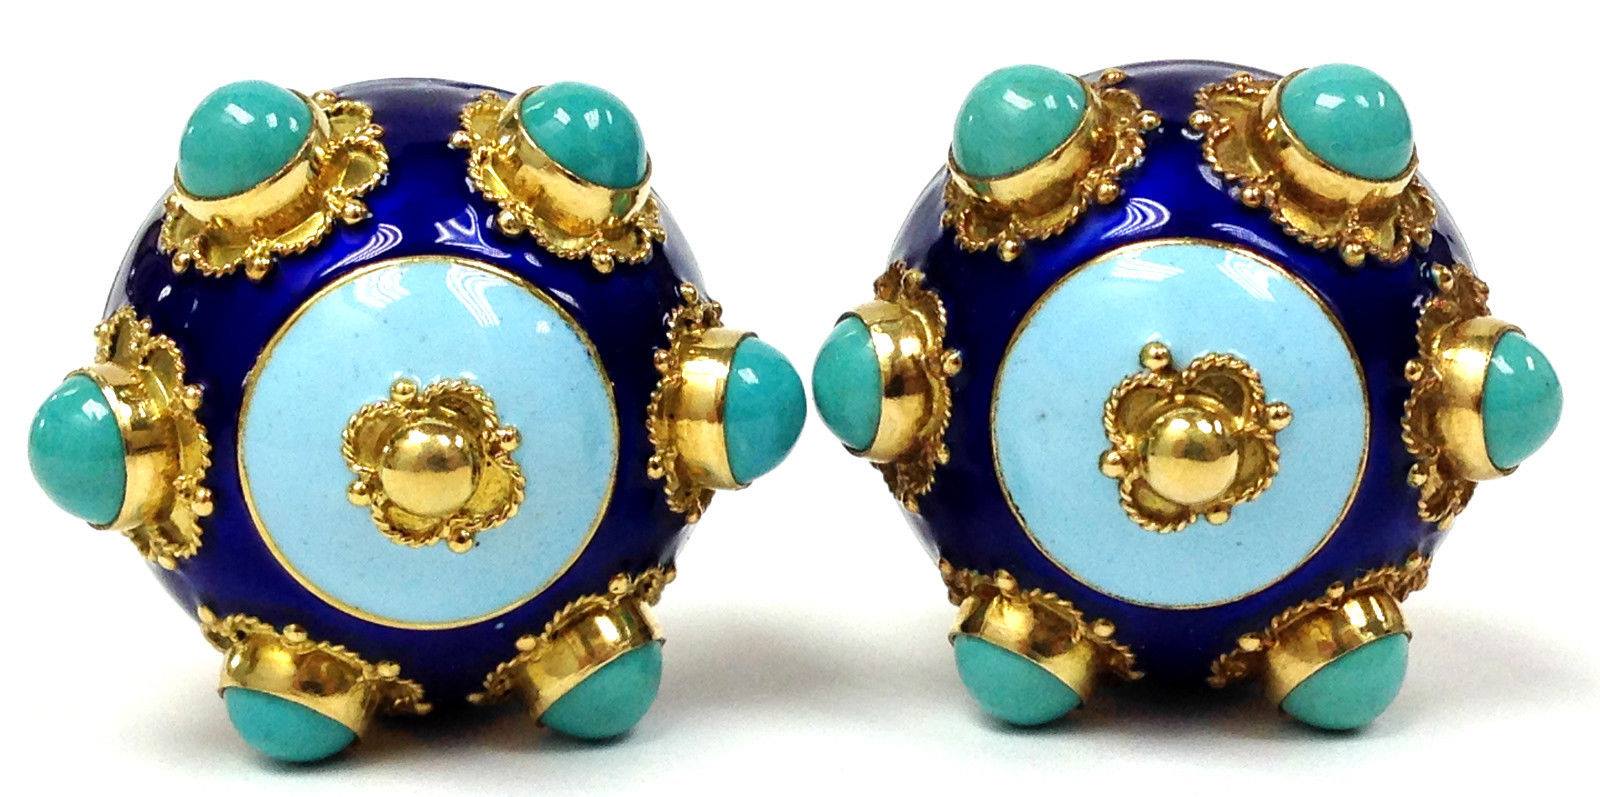 Victorian era antique 18K gold earrings featuring turquoise and cloisonné enameling